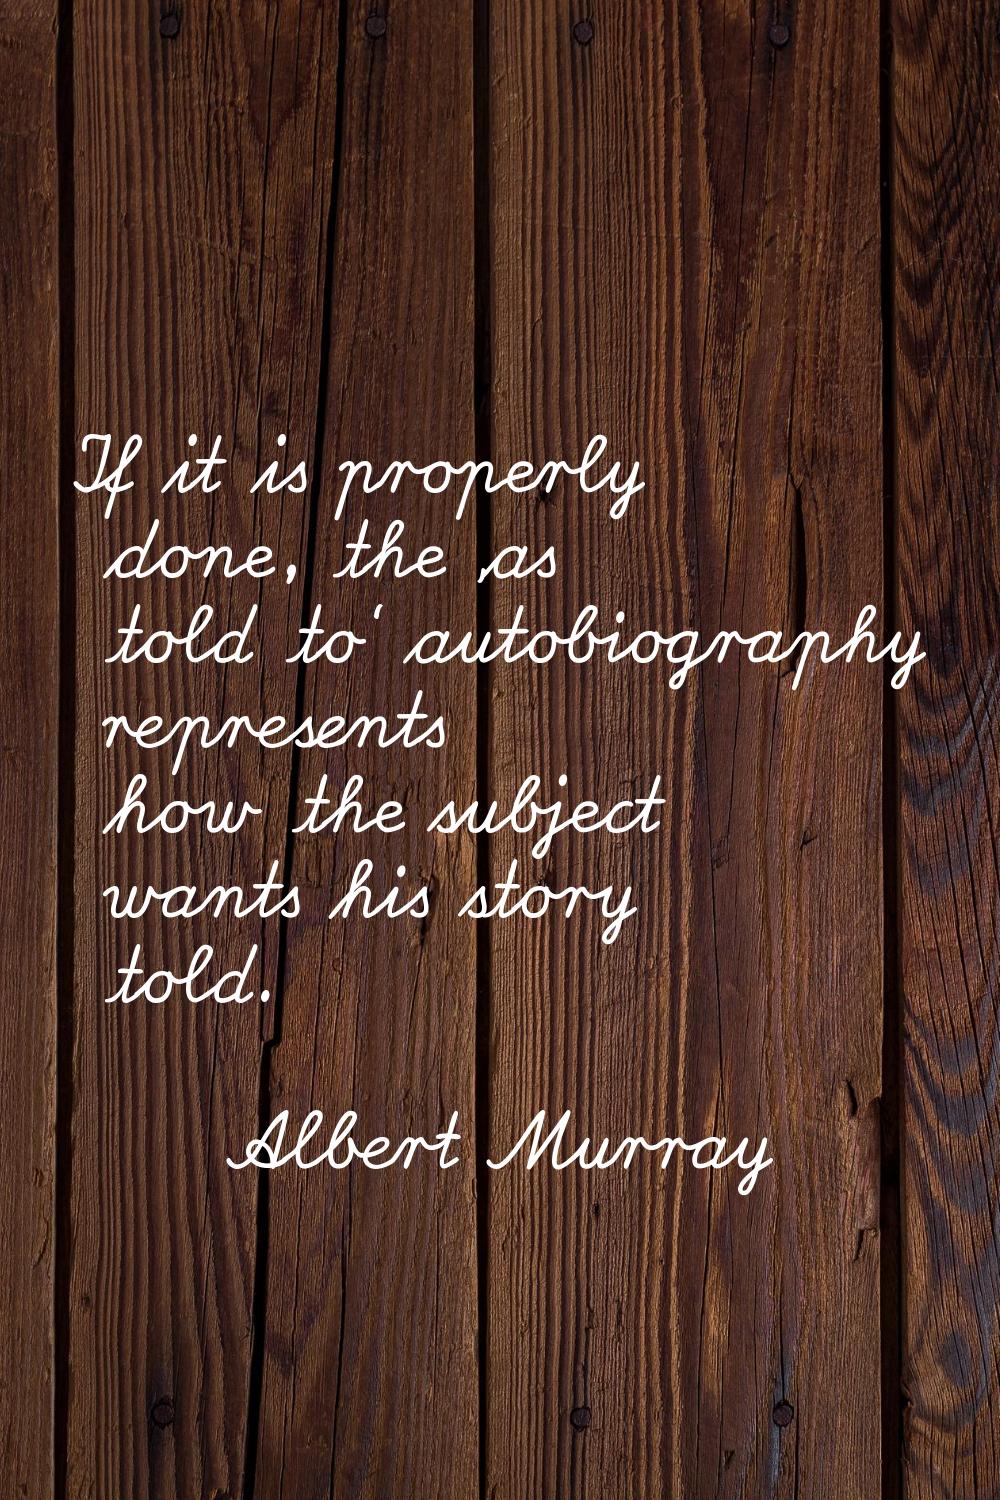 If it is properly done, the 'as told to' autobiography represents how the subject wants his story t